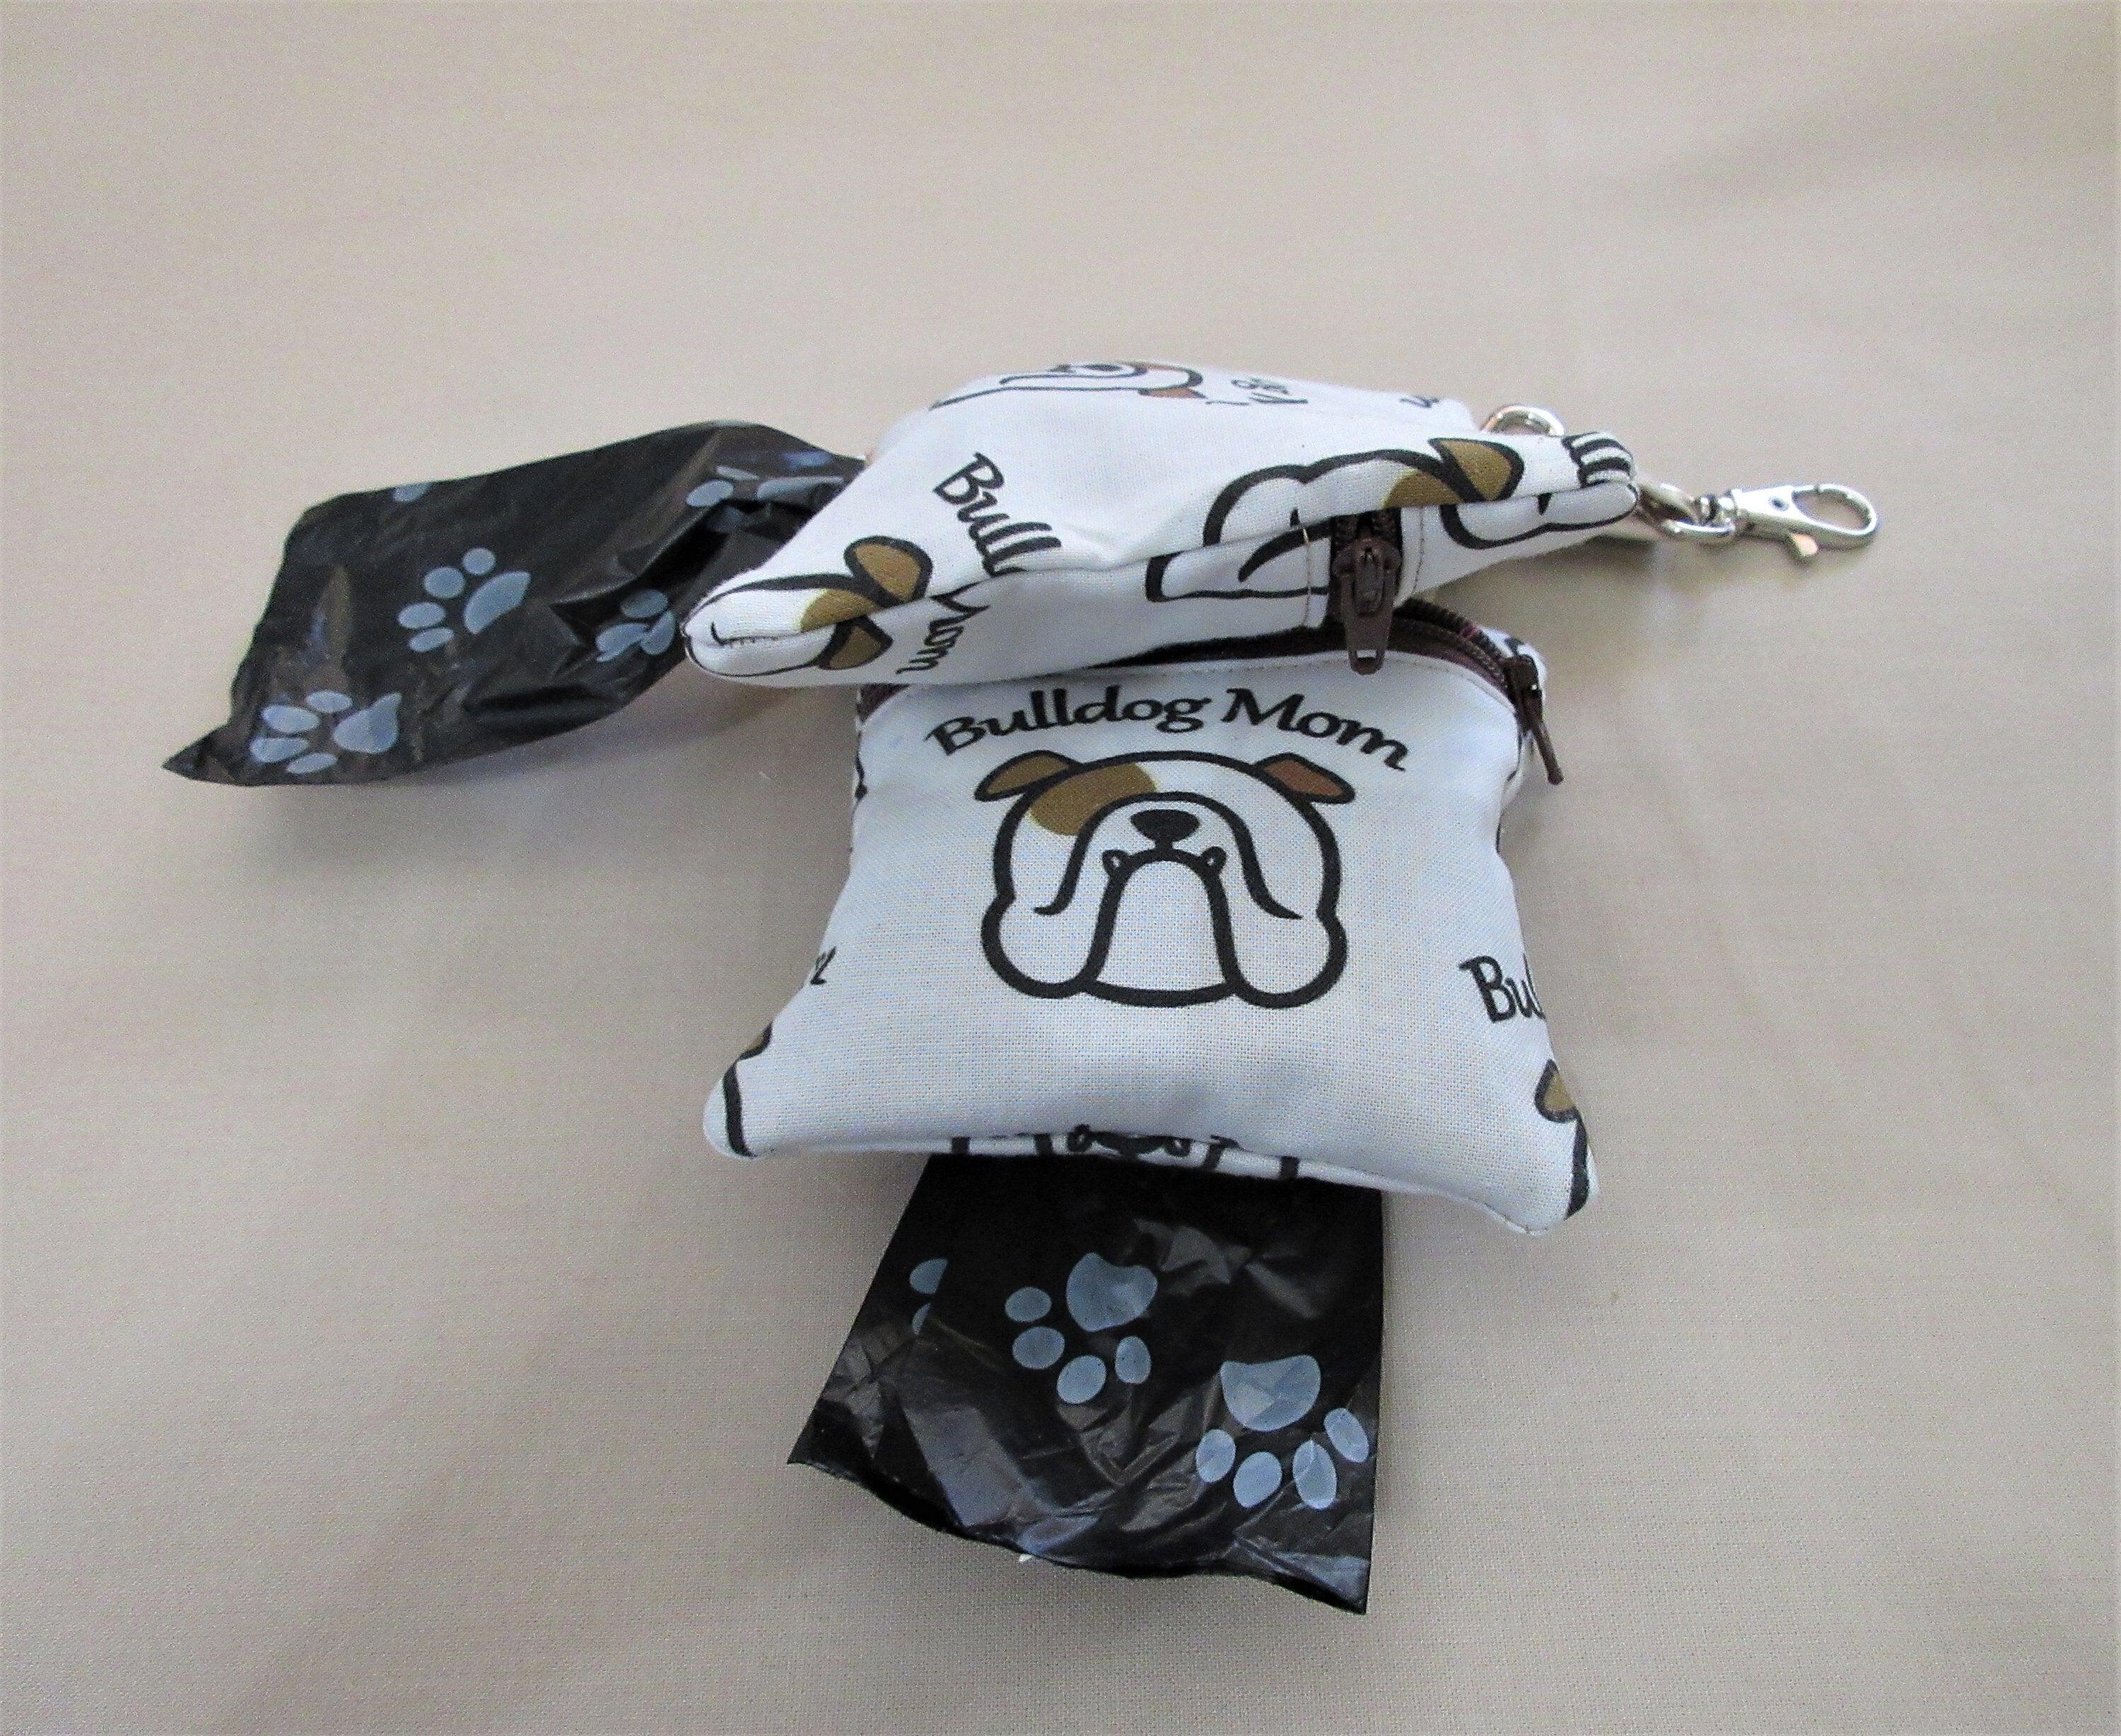 Bulldog Mom Dog Poop Bag Holder with Free roll of bags.